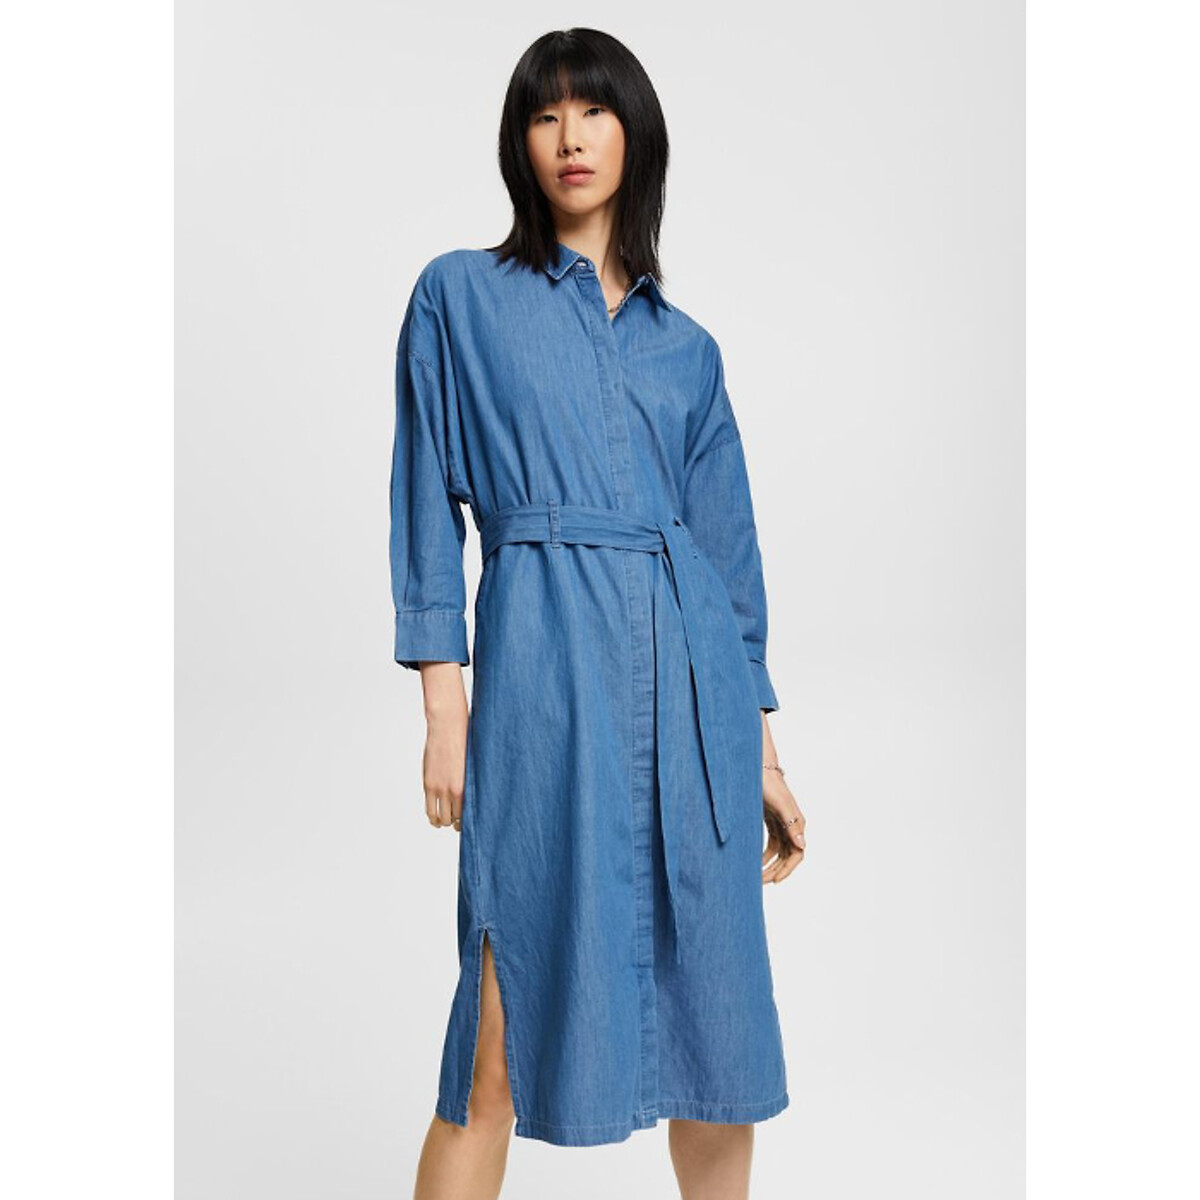 Denim Buttoned Shirt Dress with 3/4 Length Sleeves